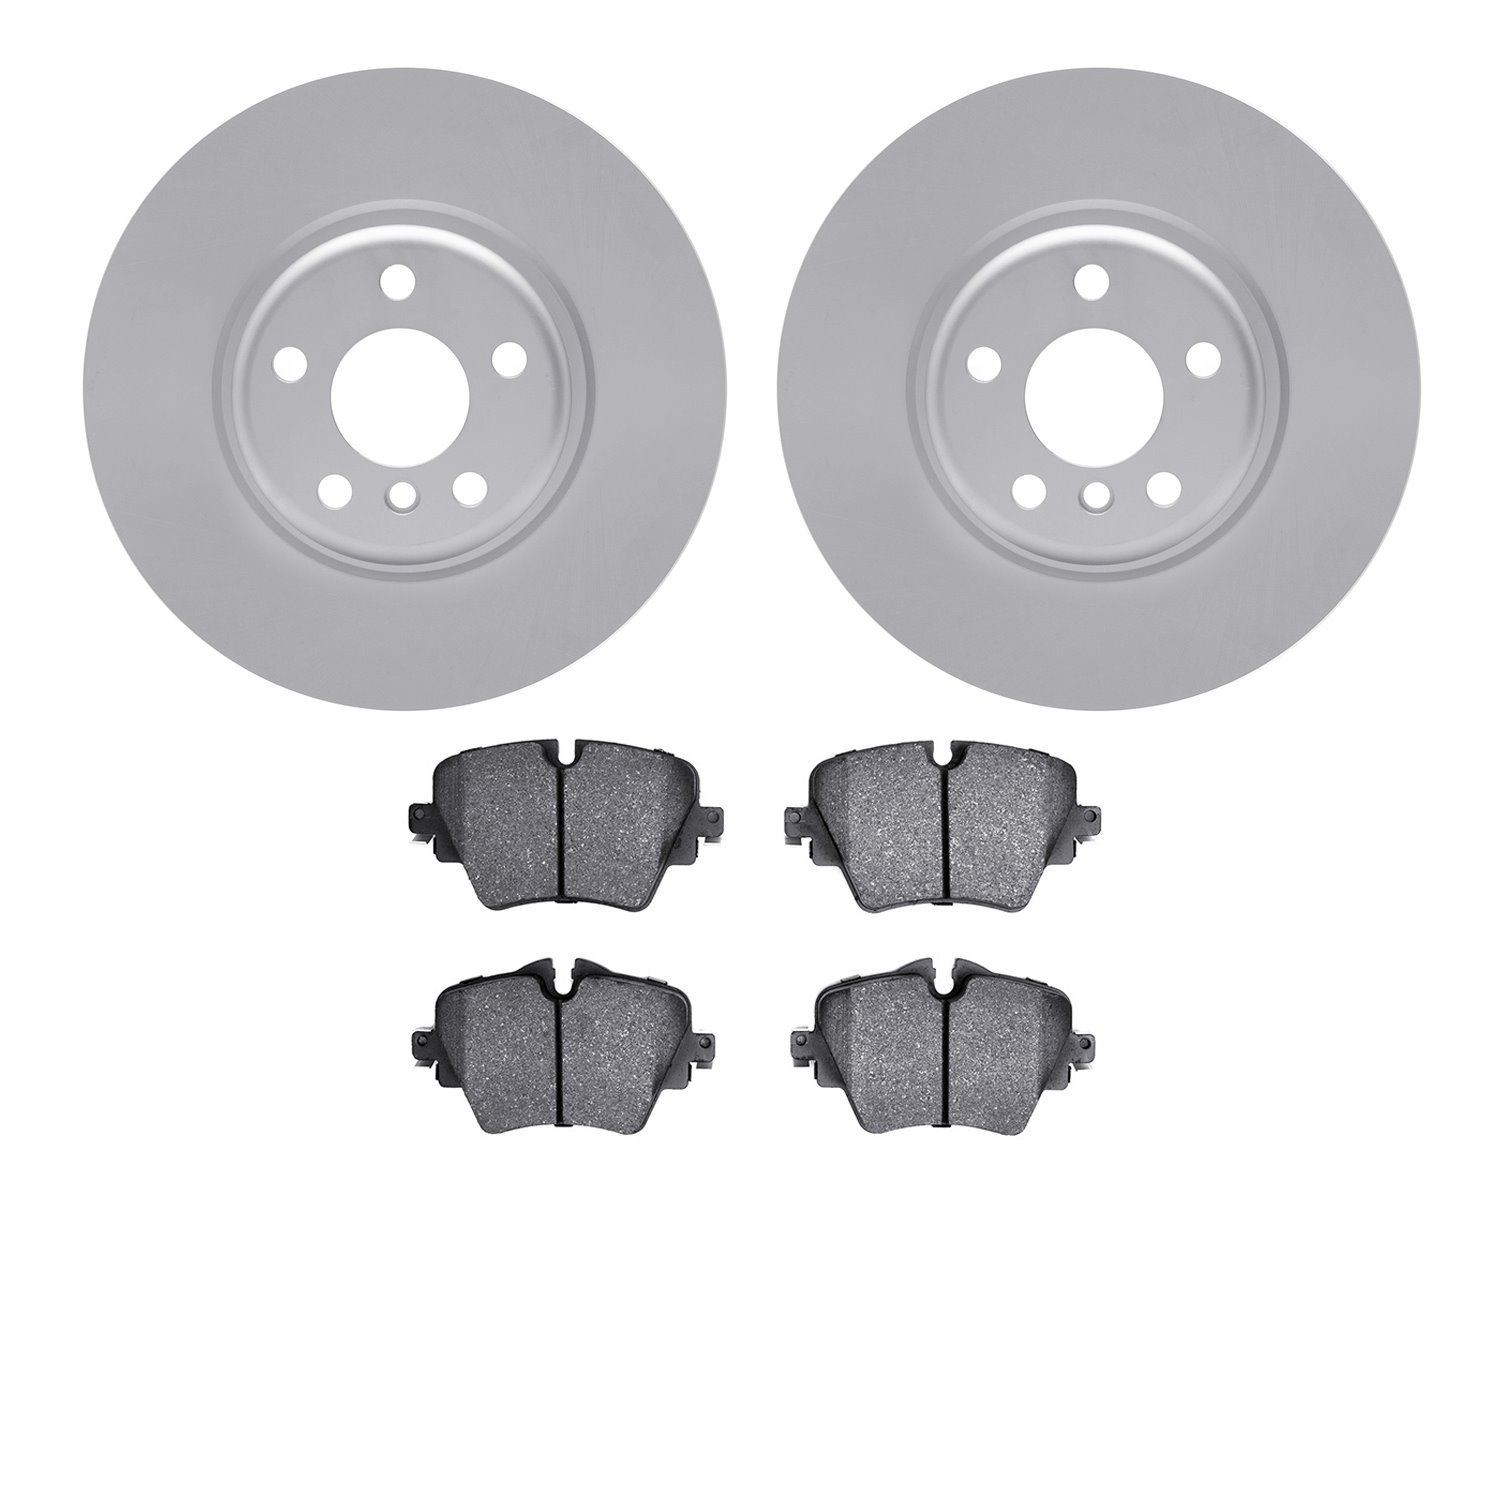 4302-31002 Geospec Brake Rotors with 3000-Series Ceramic Brake Pads Kit, Fits Select Multiple Makes/Models, Position: Front